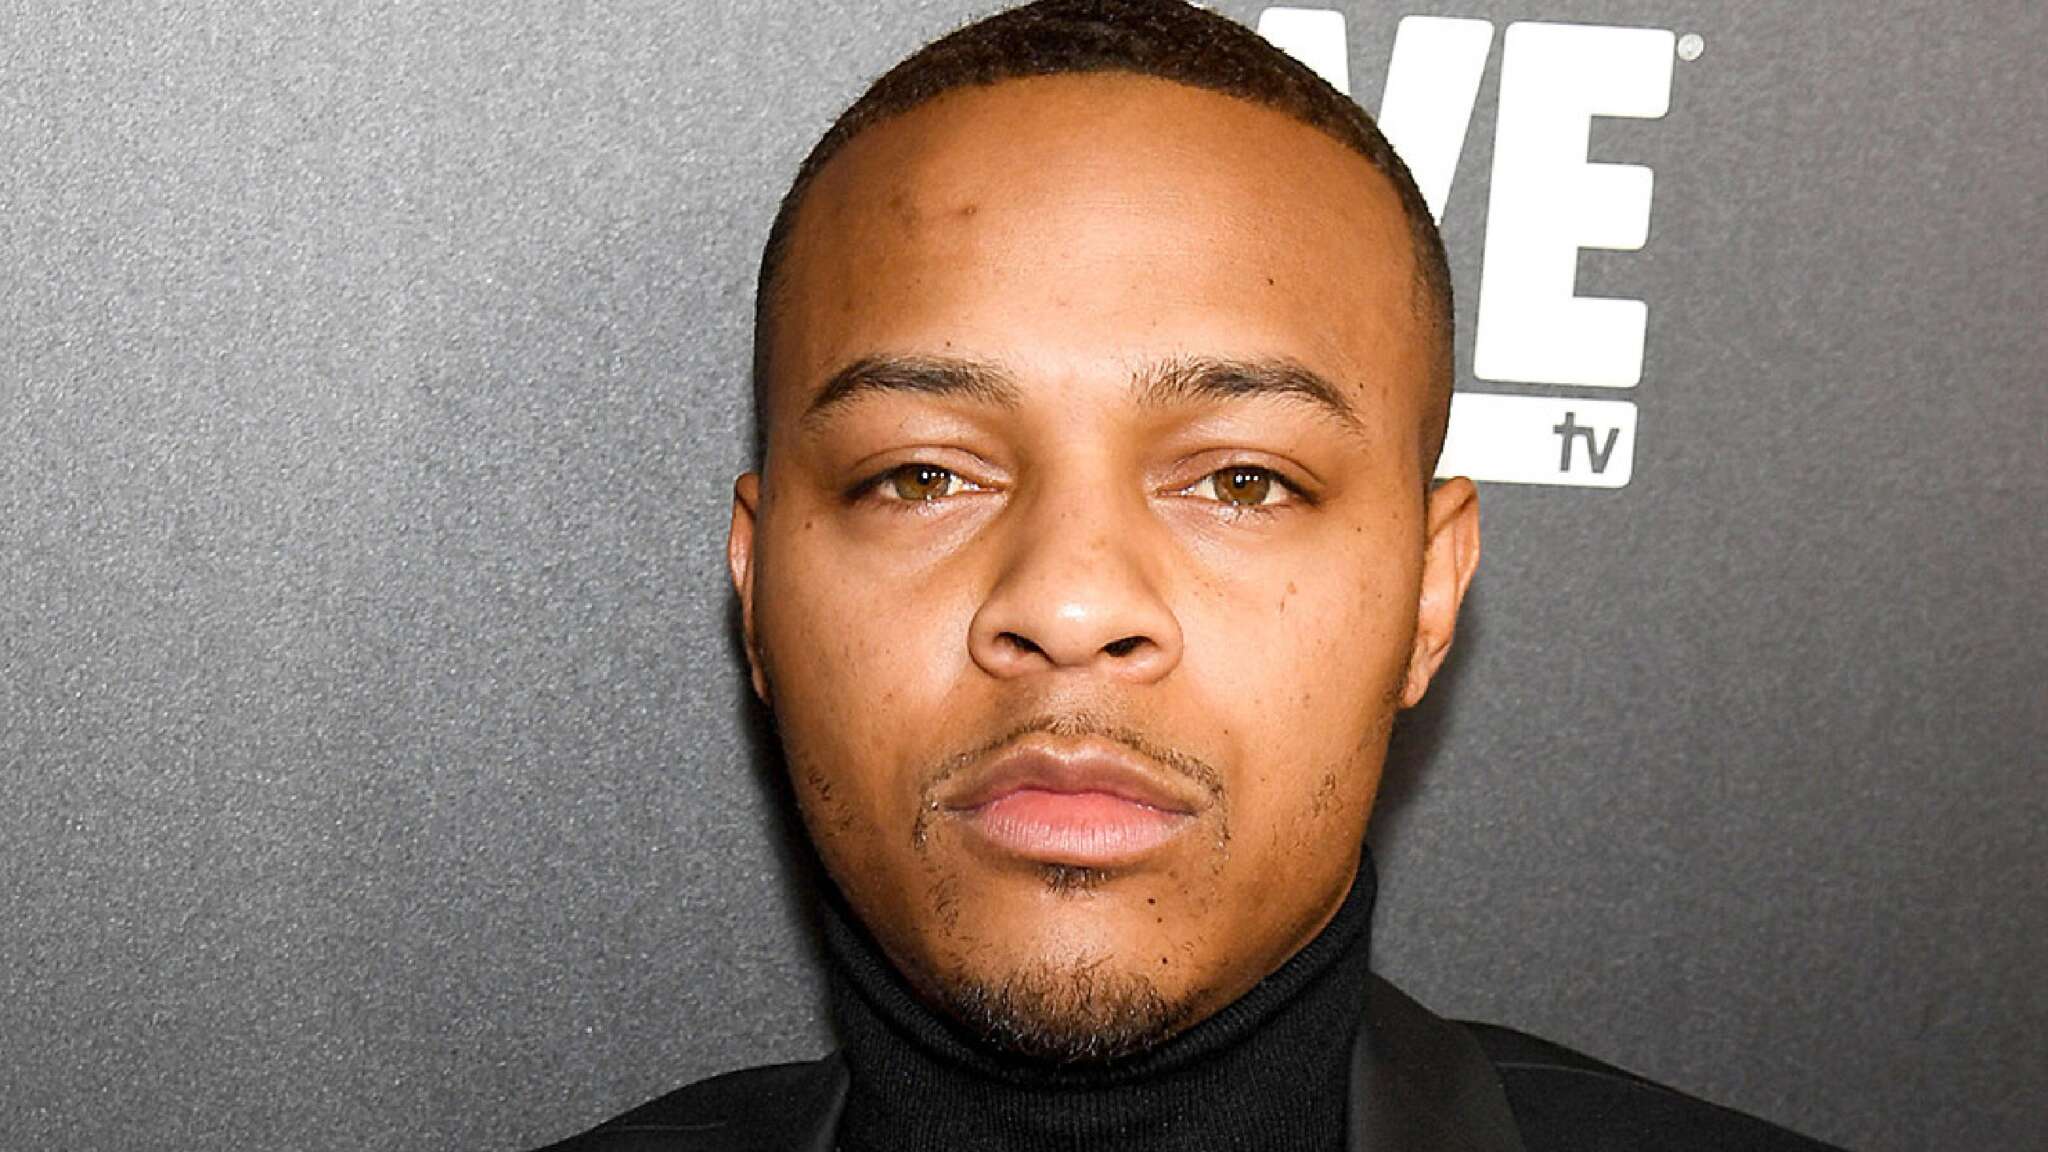 Bow Wow Addresses His Recent Controversial Performance